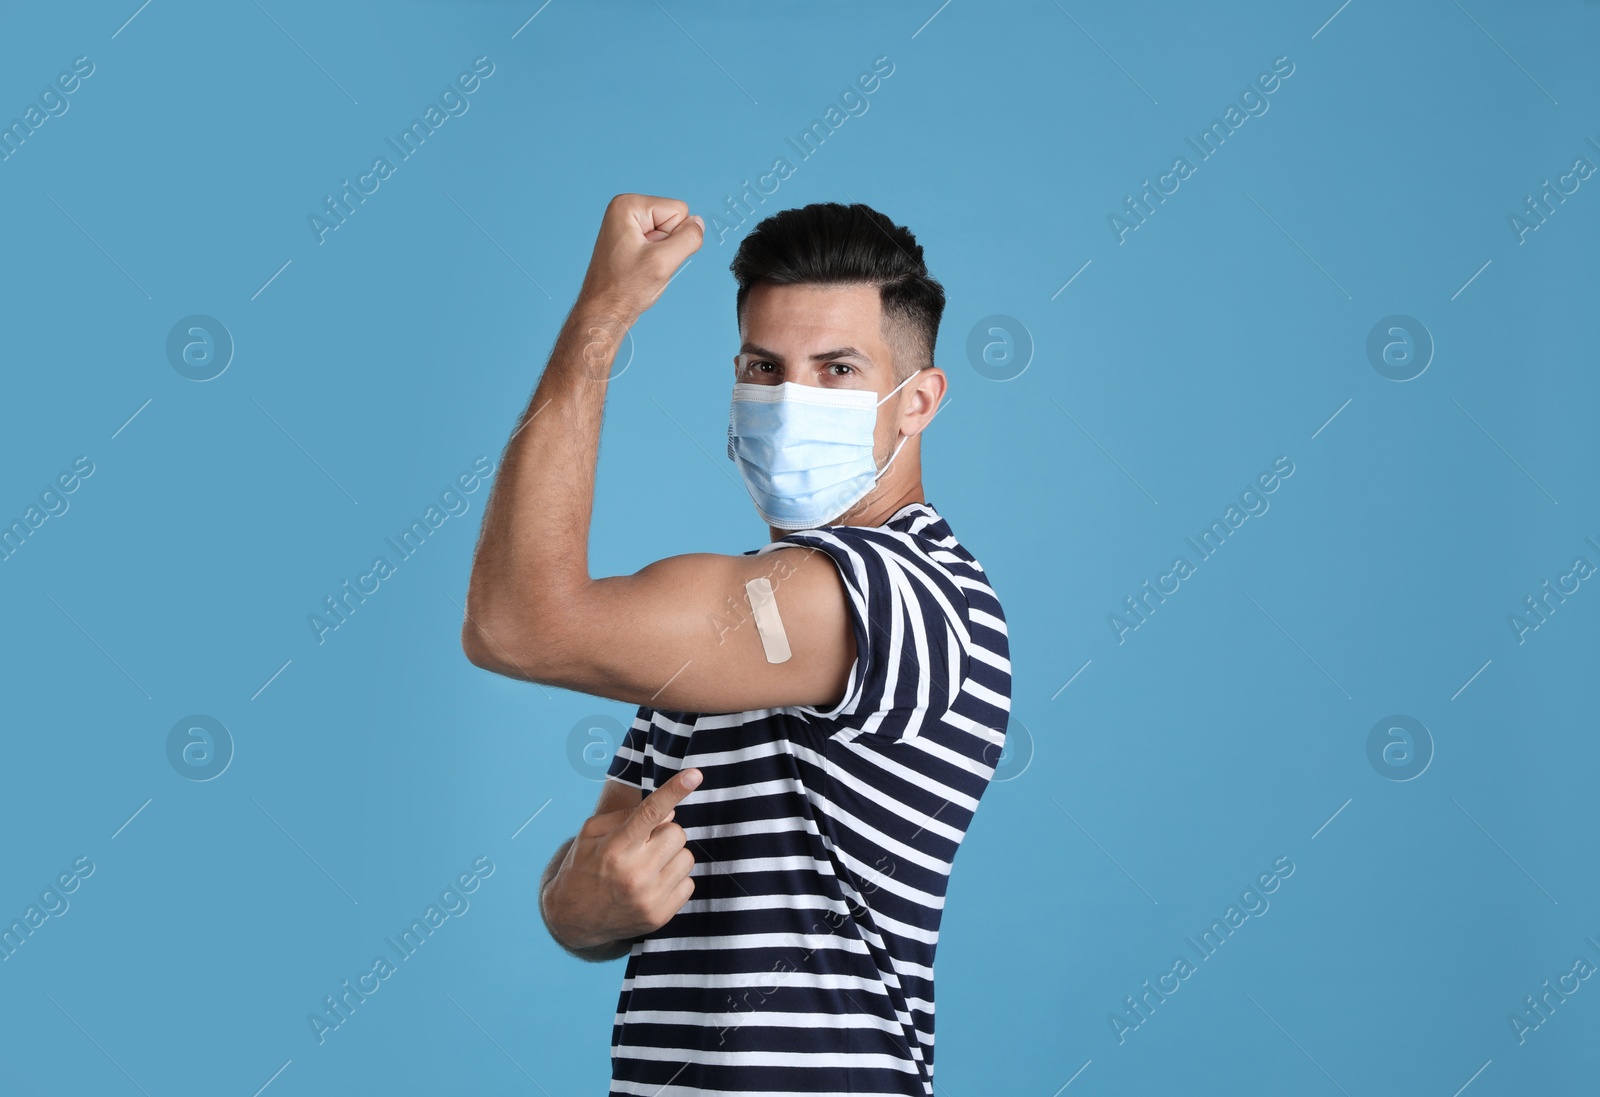 Photo of Vaccinated man with protective mask showing medical plaster on his arm against light blue background